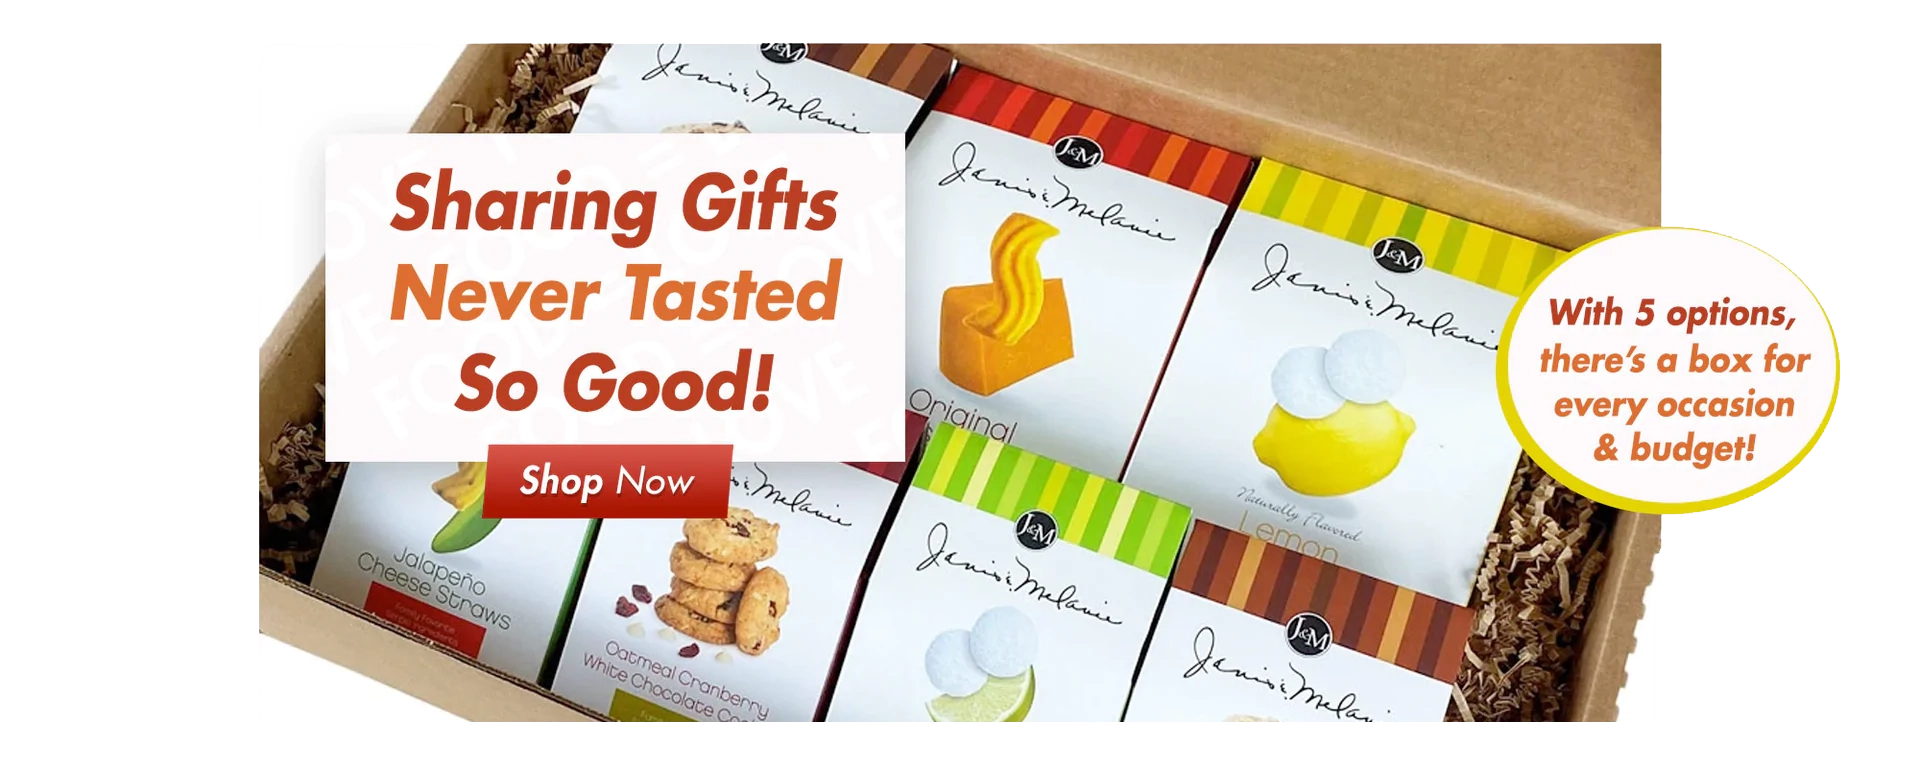 Image of Gift Box. Food equals love in our family. Sharing gifts of treats never tasted so good. With several options, we have a gift box for every occasion and budget. Click here for our gift boxes options..